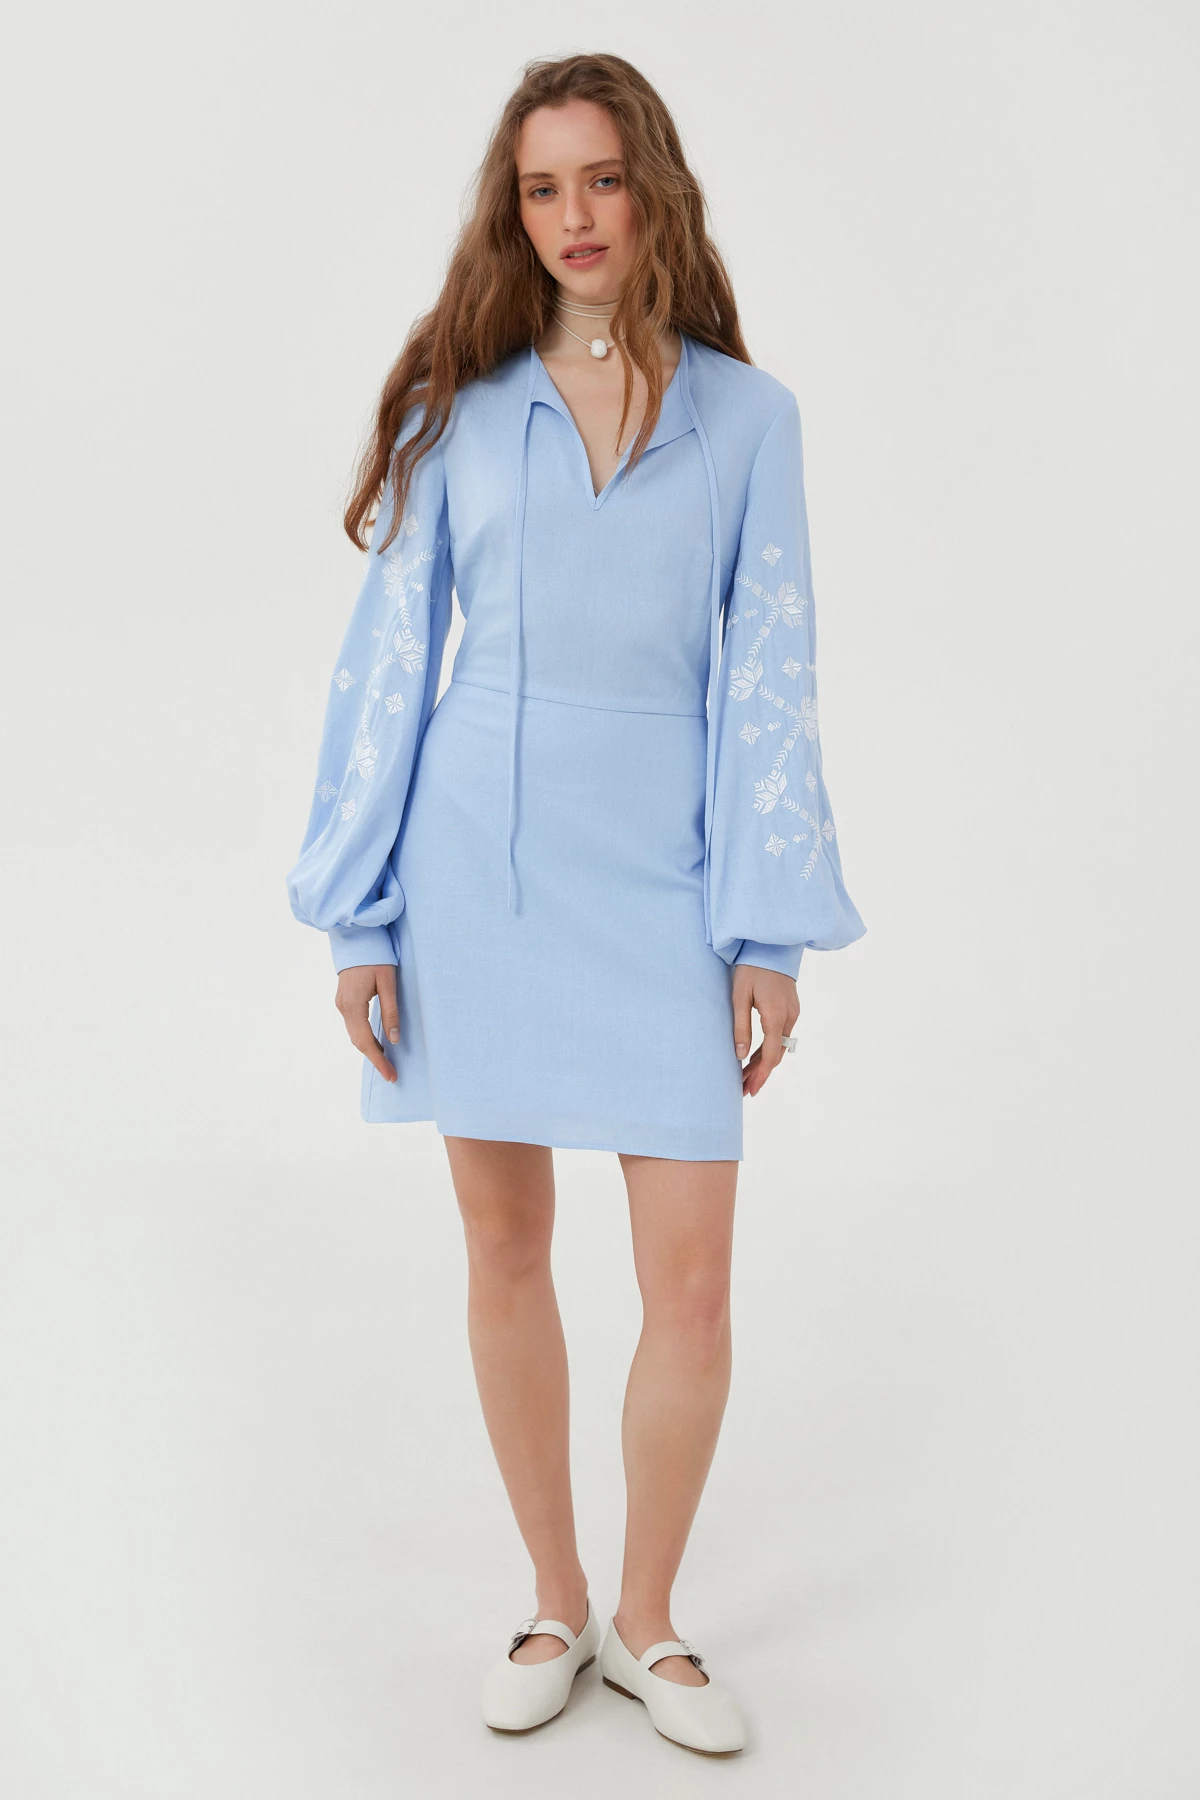 Embroidered short dress "Barvinok" with blue linen, photo 2